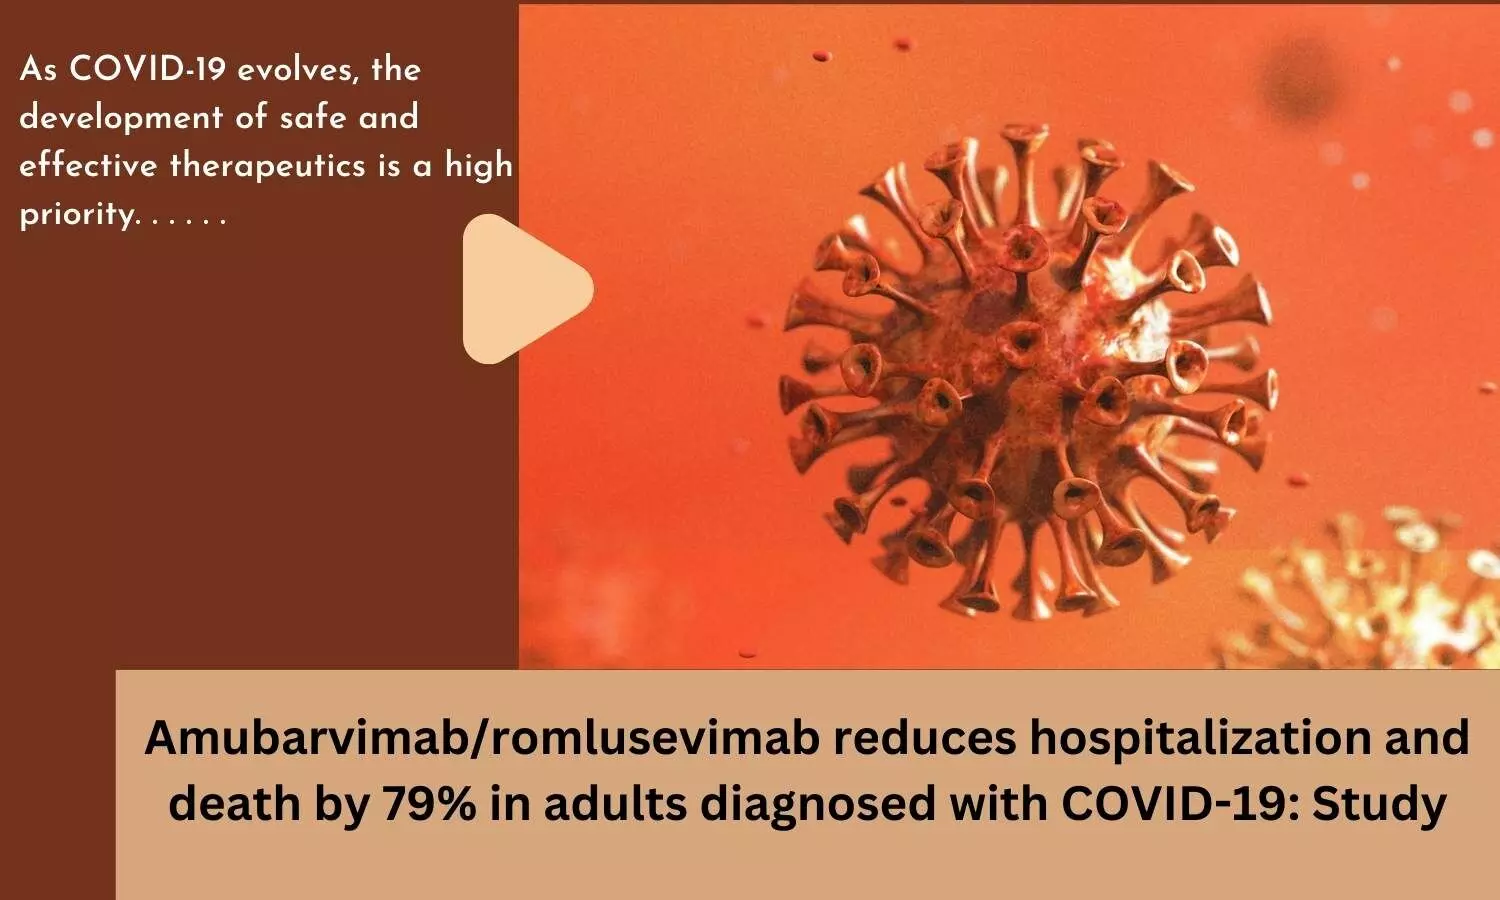 Amubarvimab/romlusevimab reduces hospitalization and death by 79% in adults diagnosed with COVID-19: Study